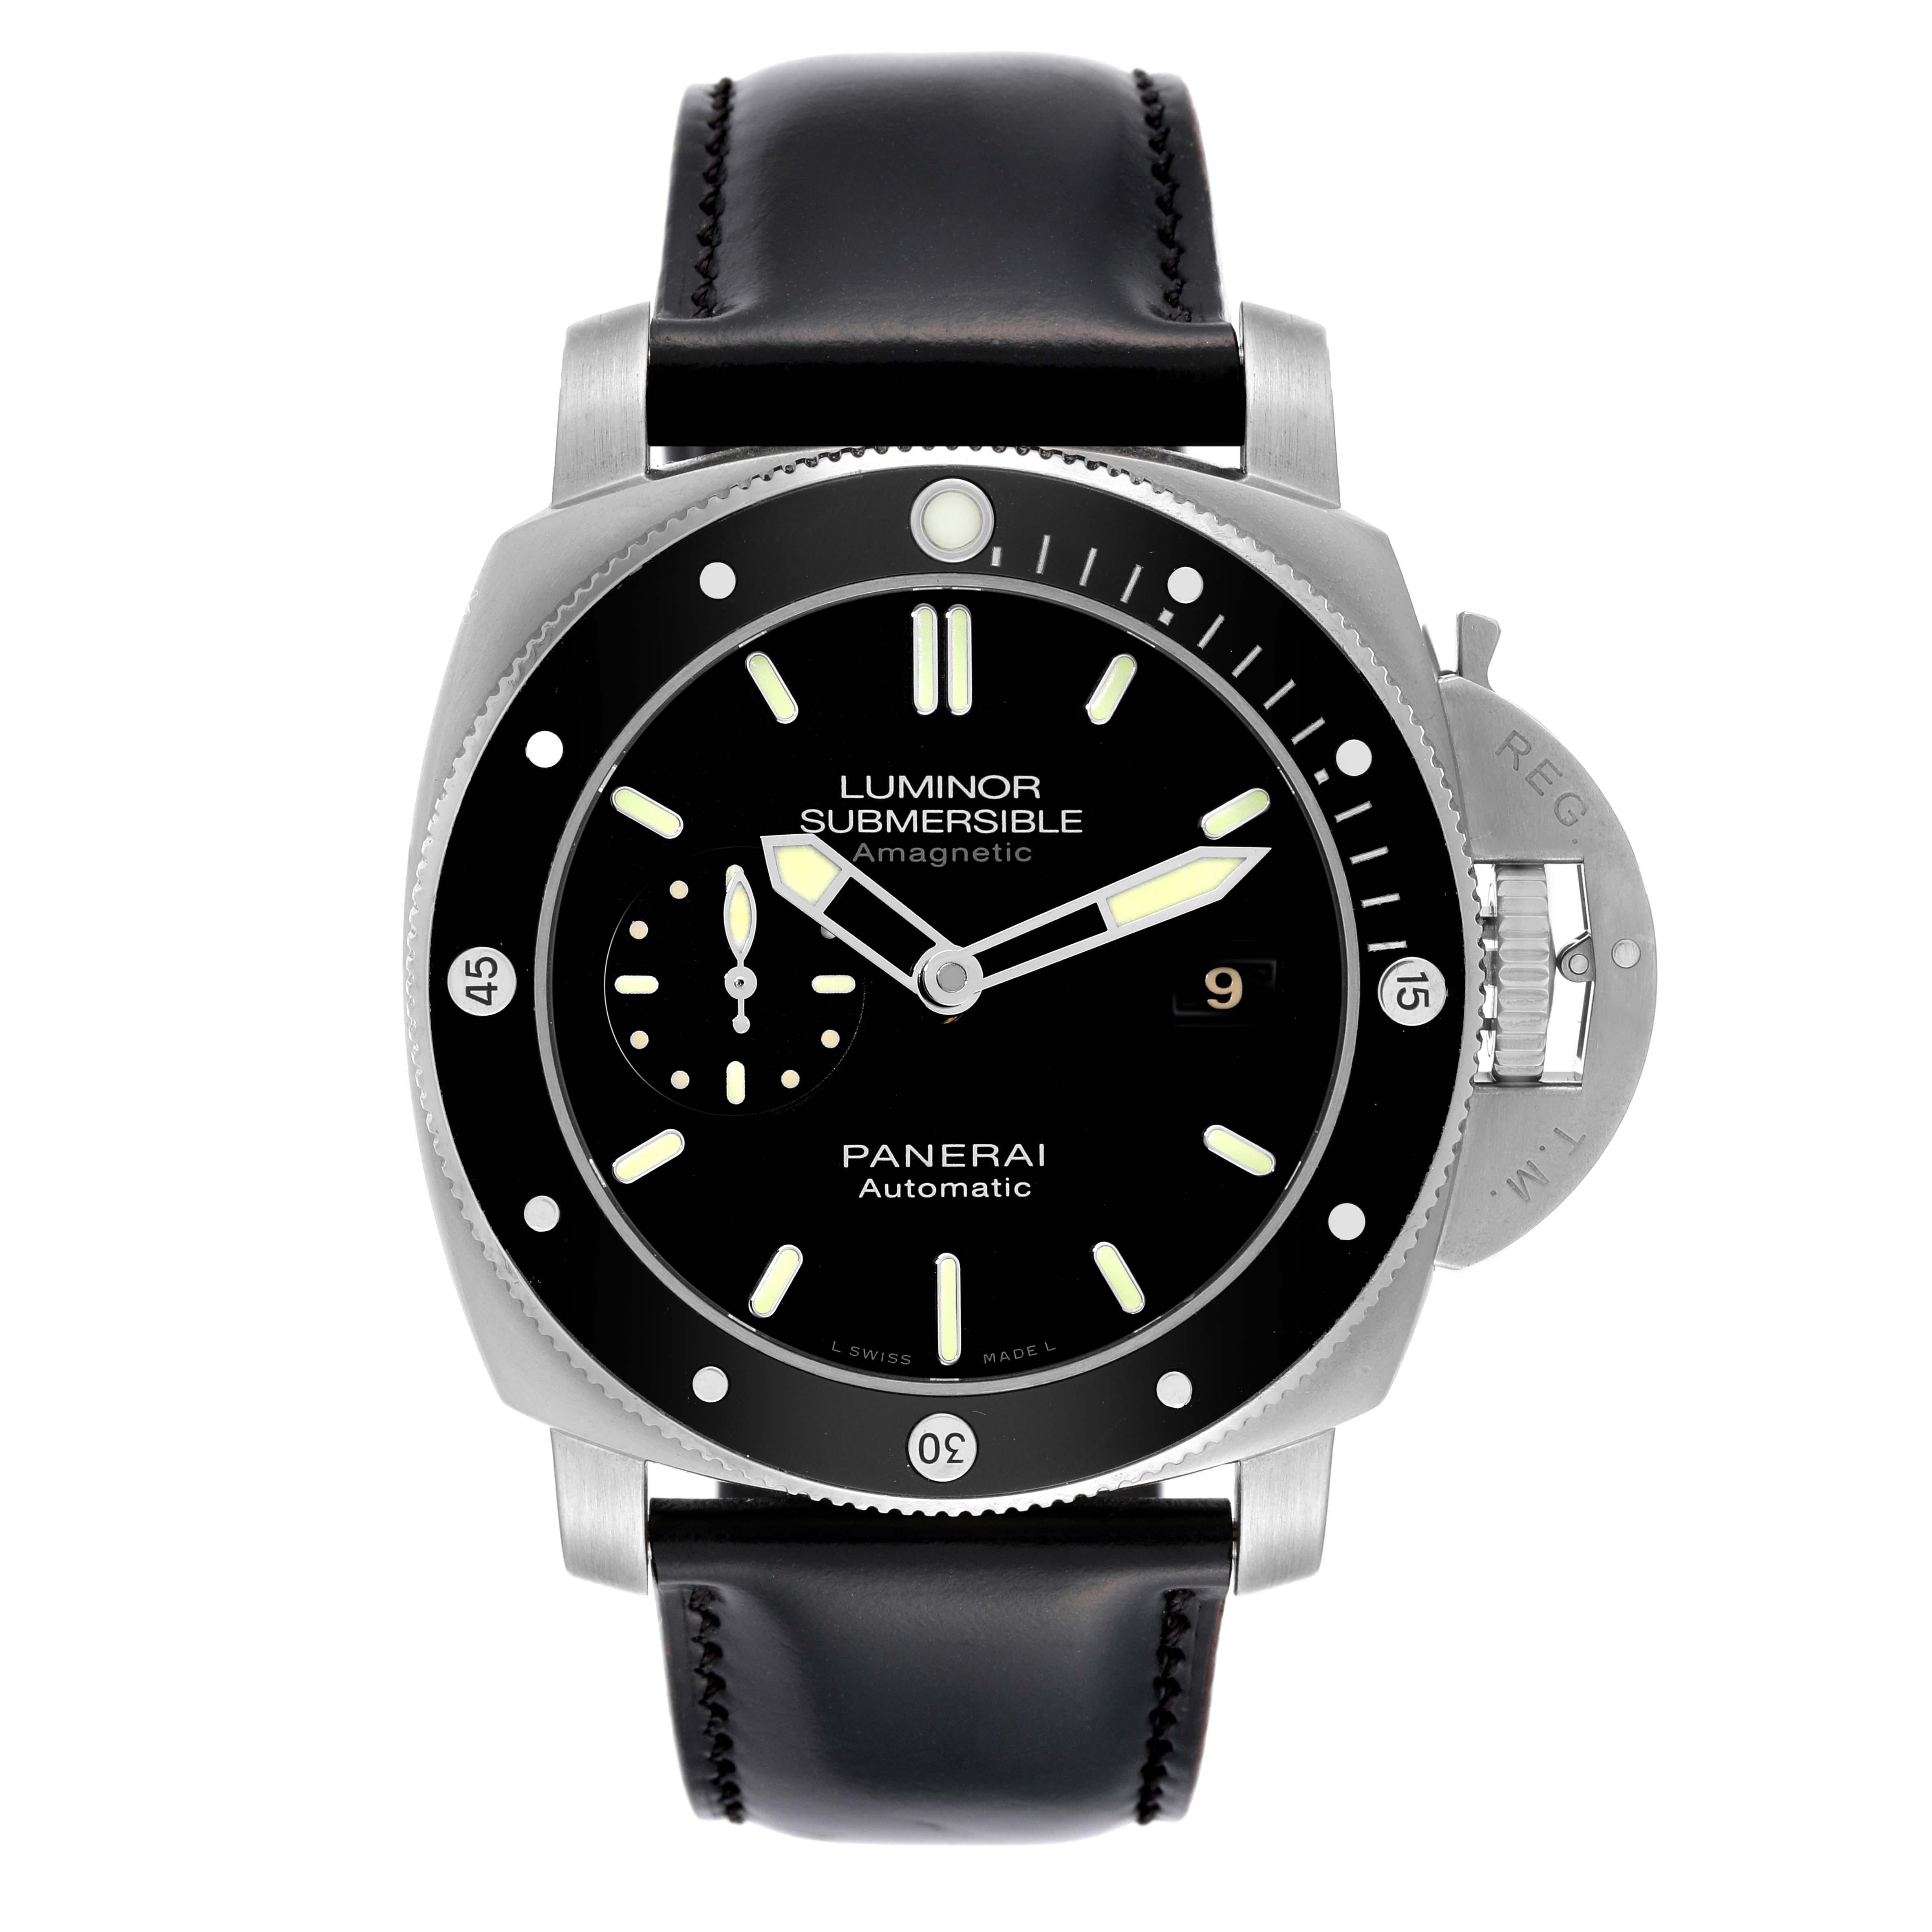 Panerai Luminor Submersible 1950 Titanium Amagnetic Mens Watch PAM00389. Automatic self-winding movement. Two part cushion shaped titanium case 47.0 mm in diameter. Panerai patented crown protector. Unidirectional rotating titanium bezel with a